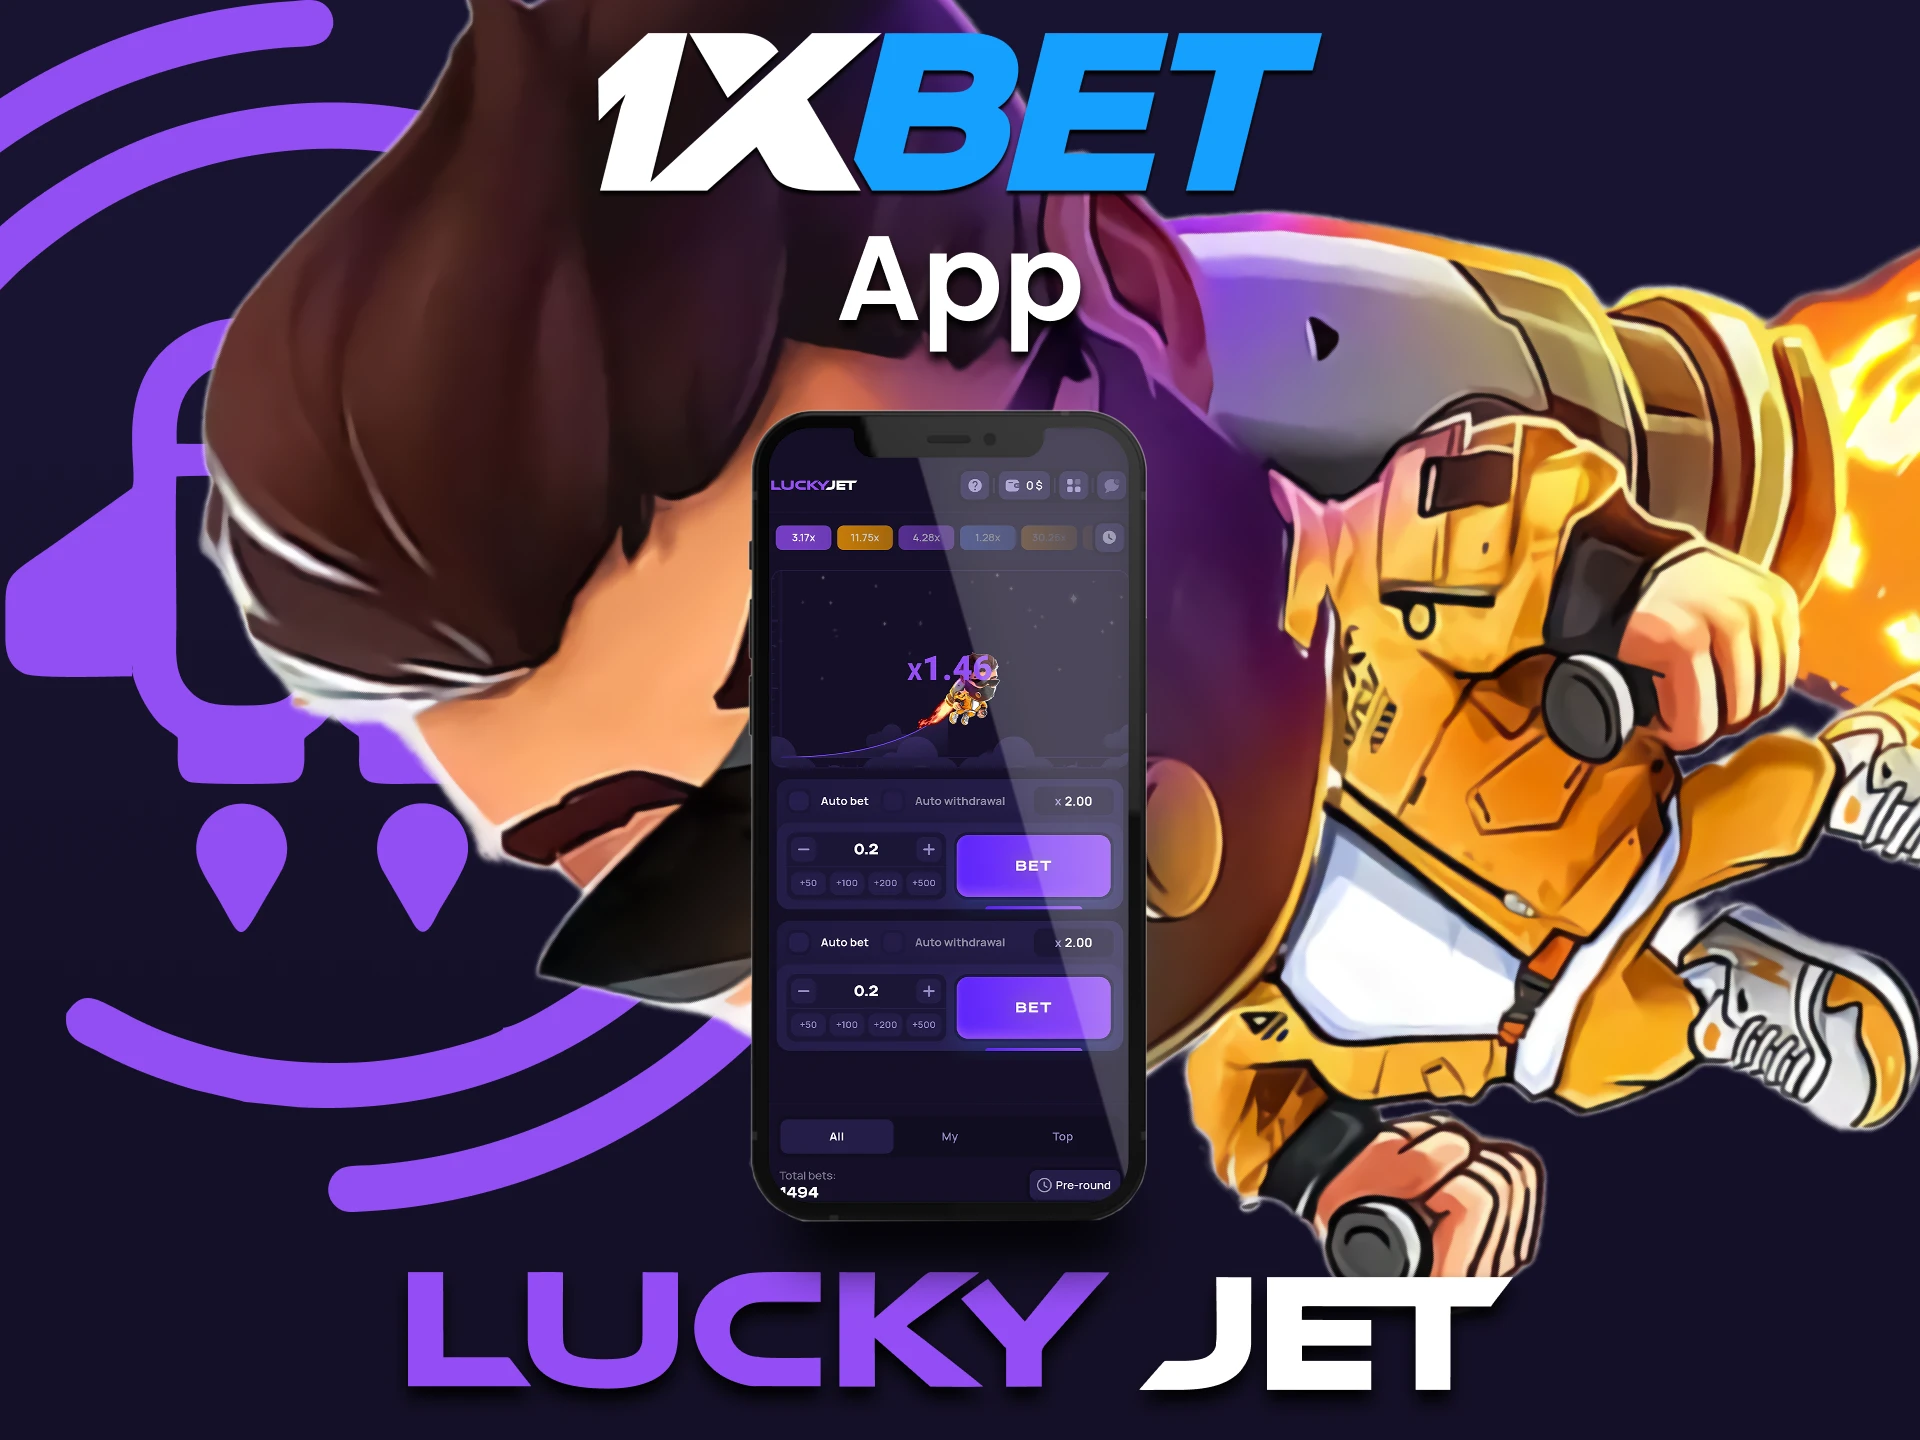 To play Lucky Jet, use the 1xbet app.